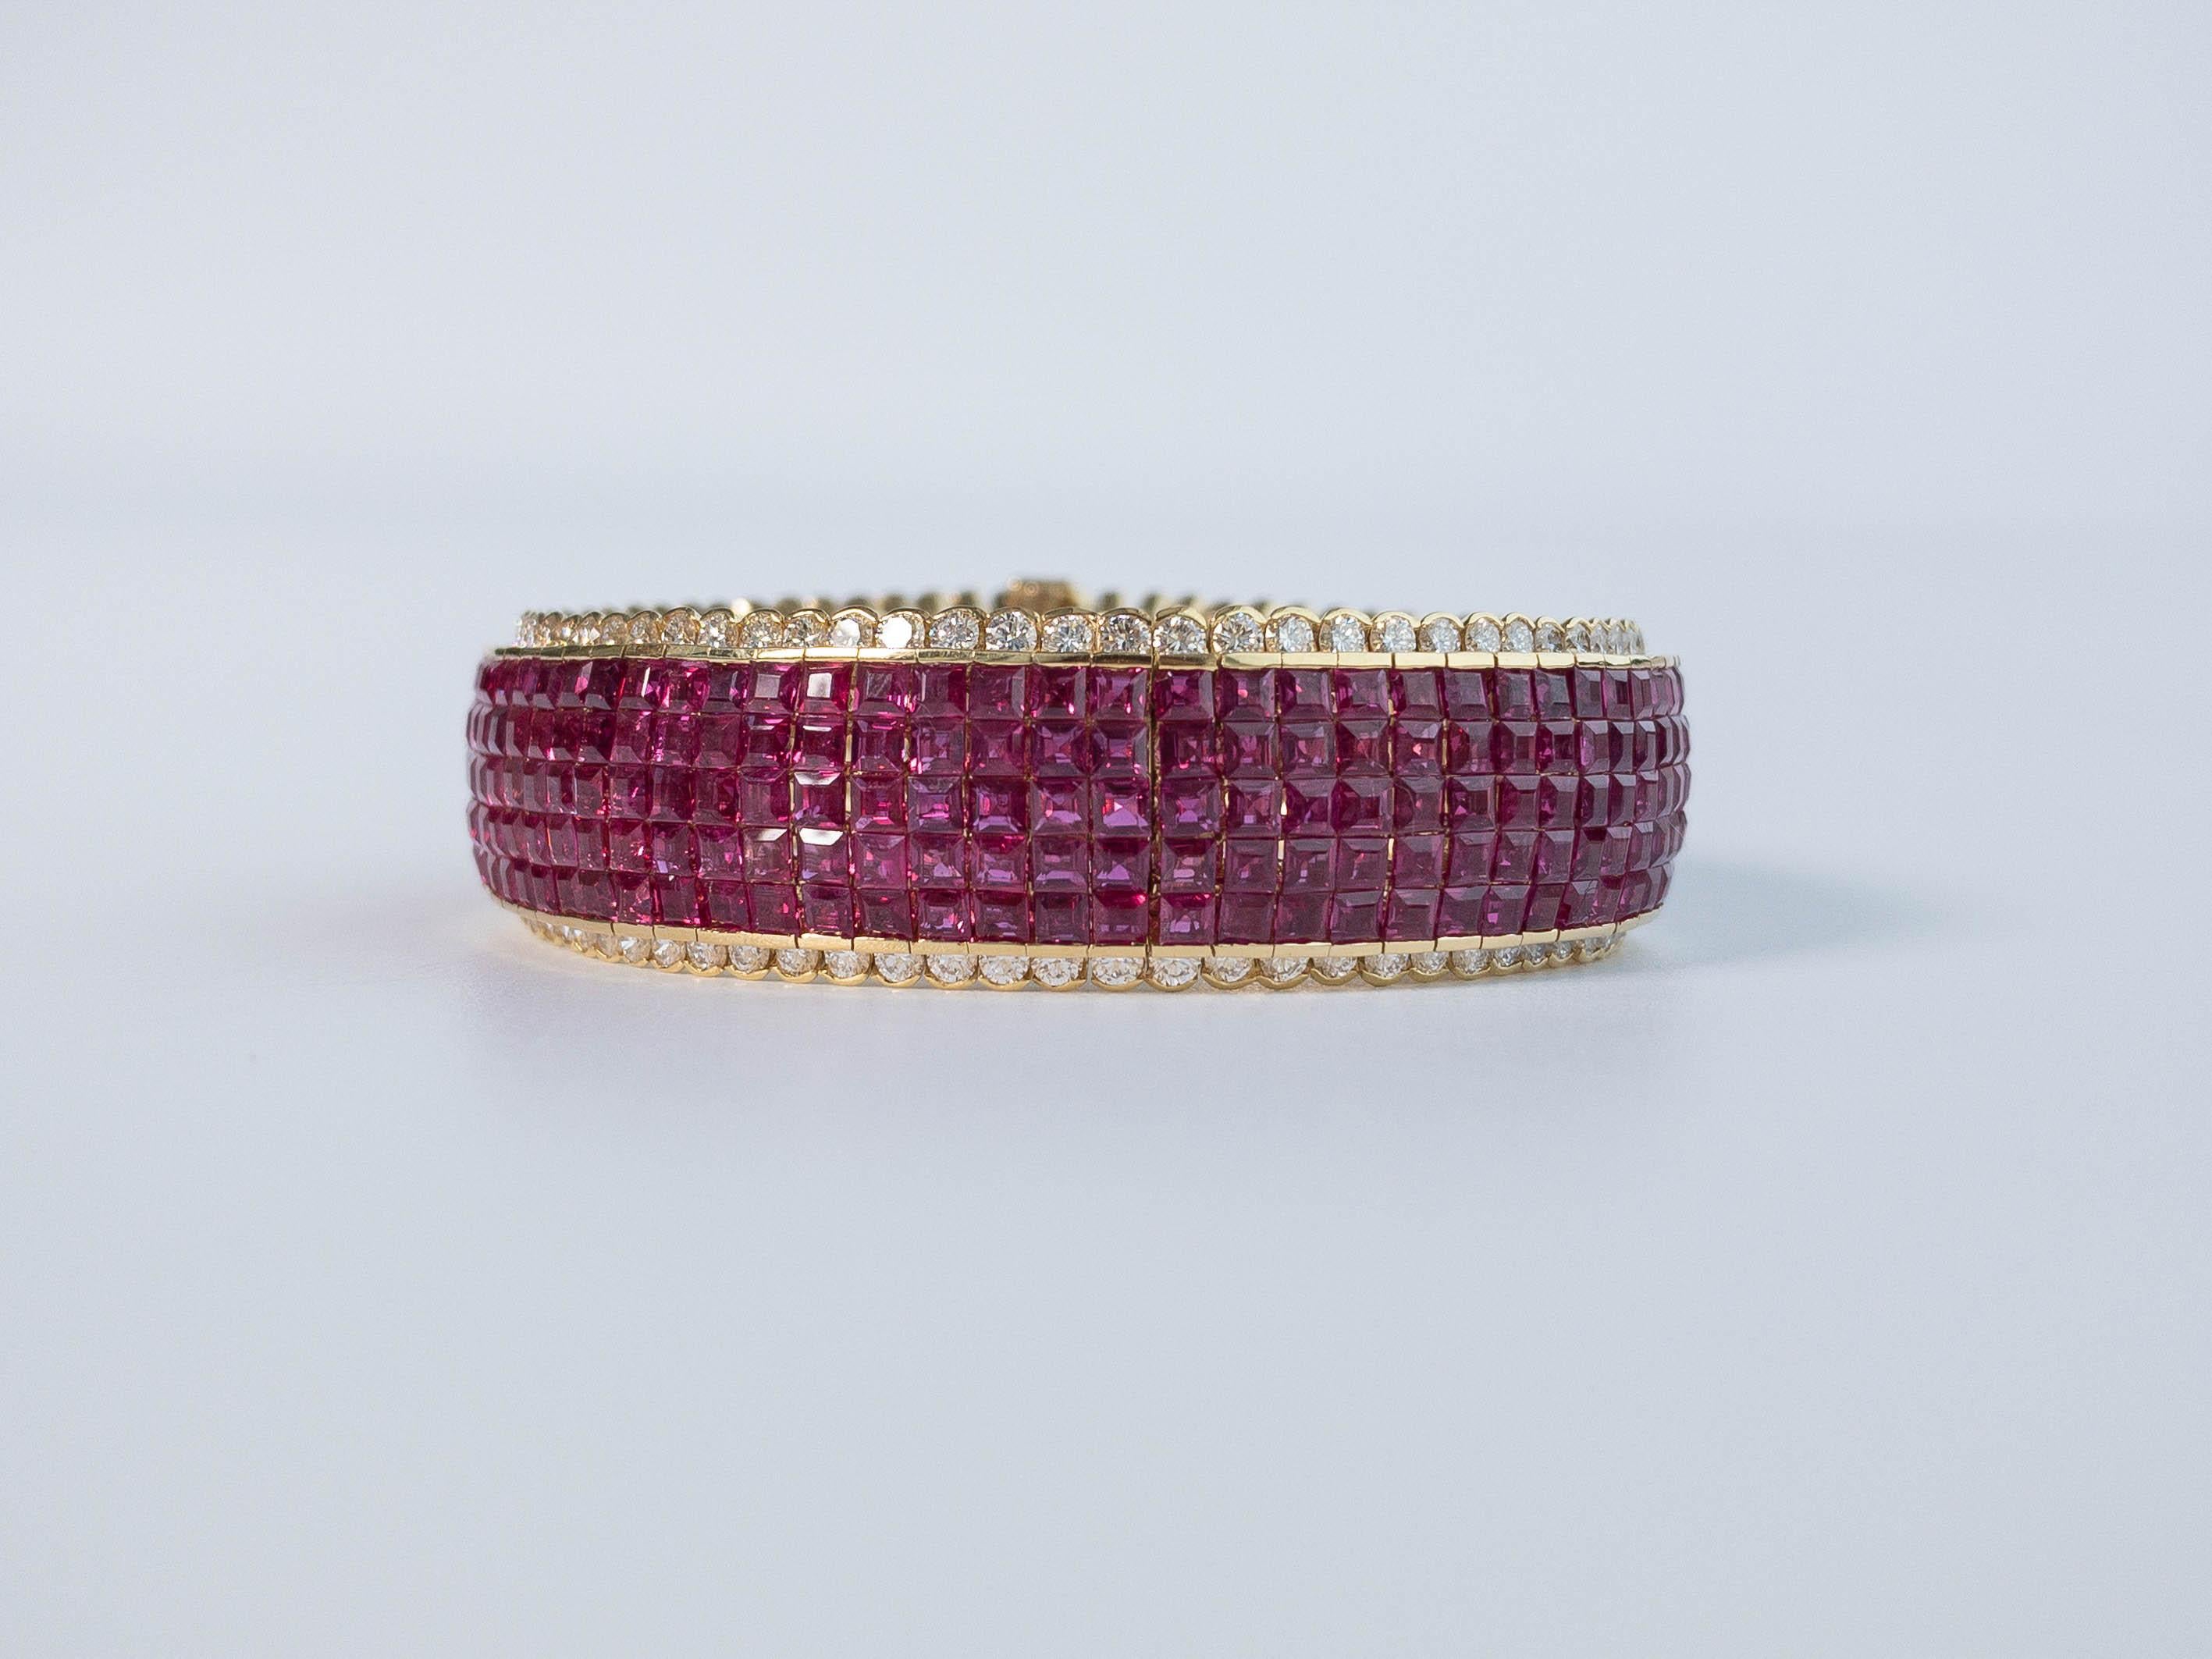 A classic yellow gold invisible set ruby and diamond bracelet.  This piece houses an impressive 370 pieces of natural square cut rubies in five rows of invisible setting surrounded by 148 bezel set round white diamonds. 

Ruby 370 pcs.
Size 2.5